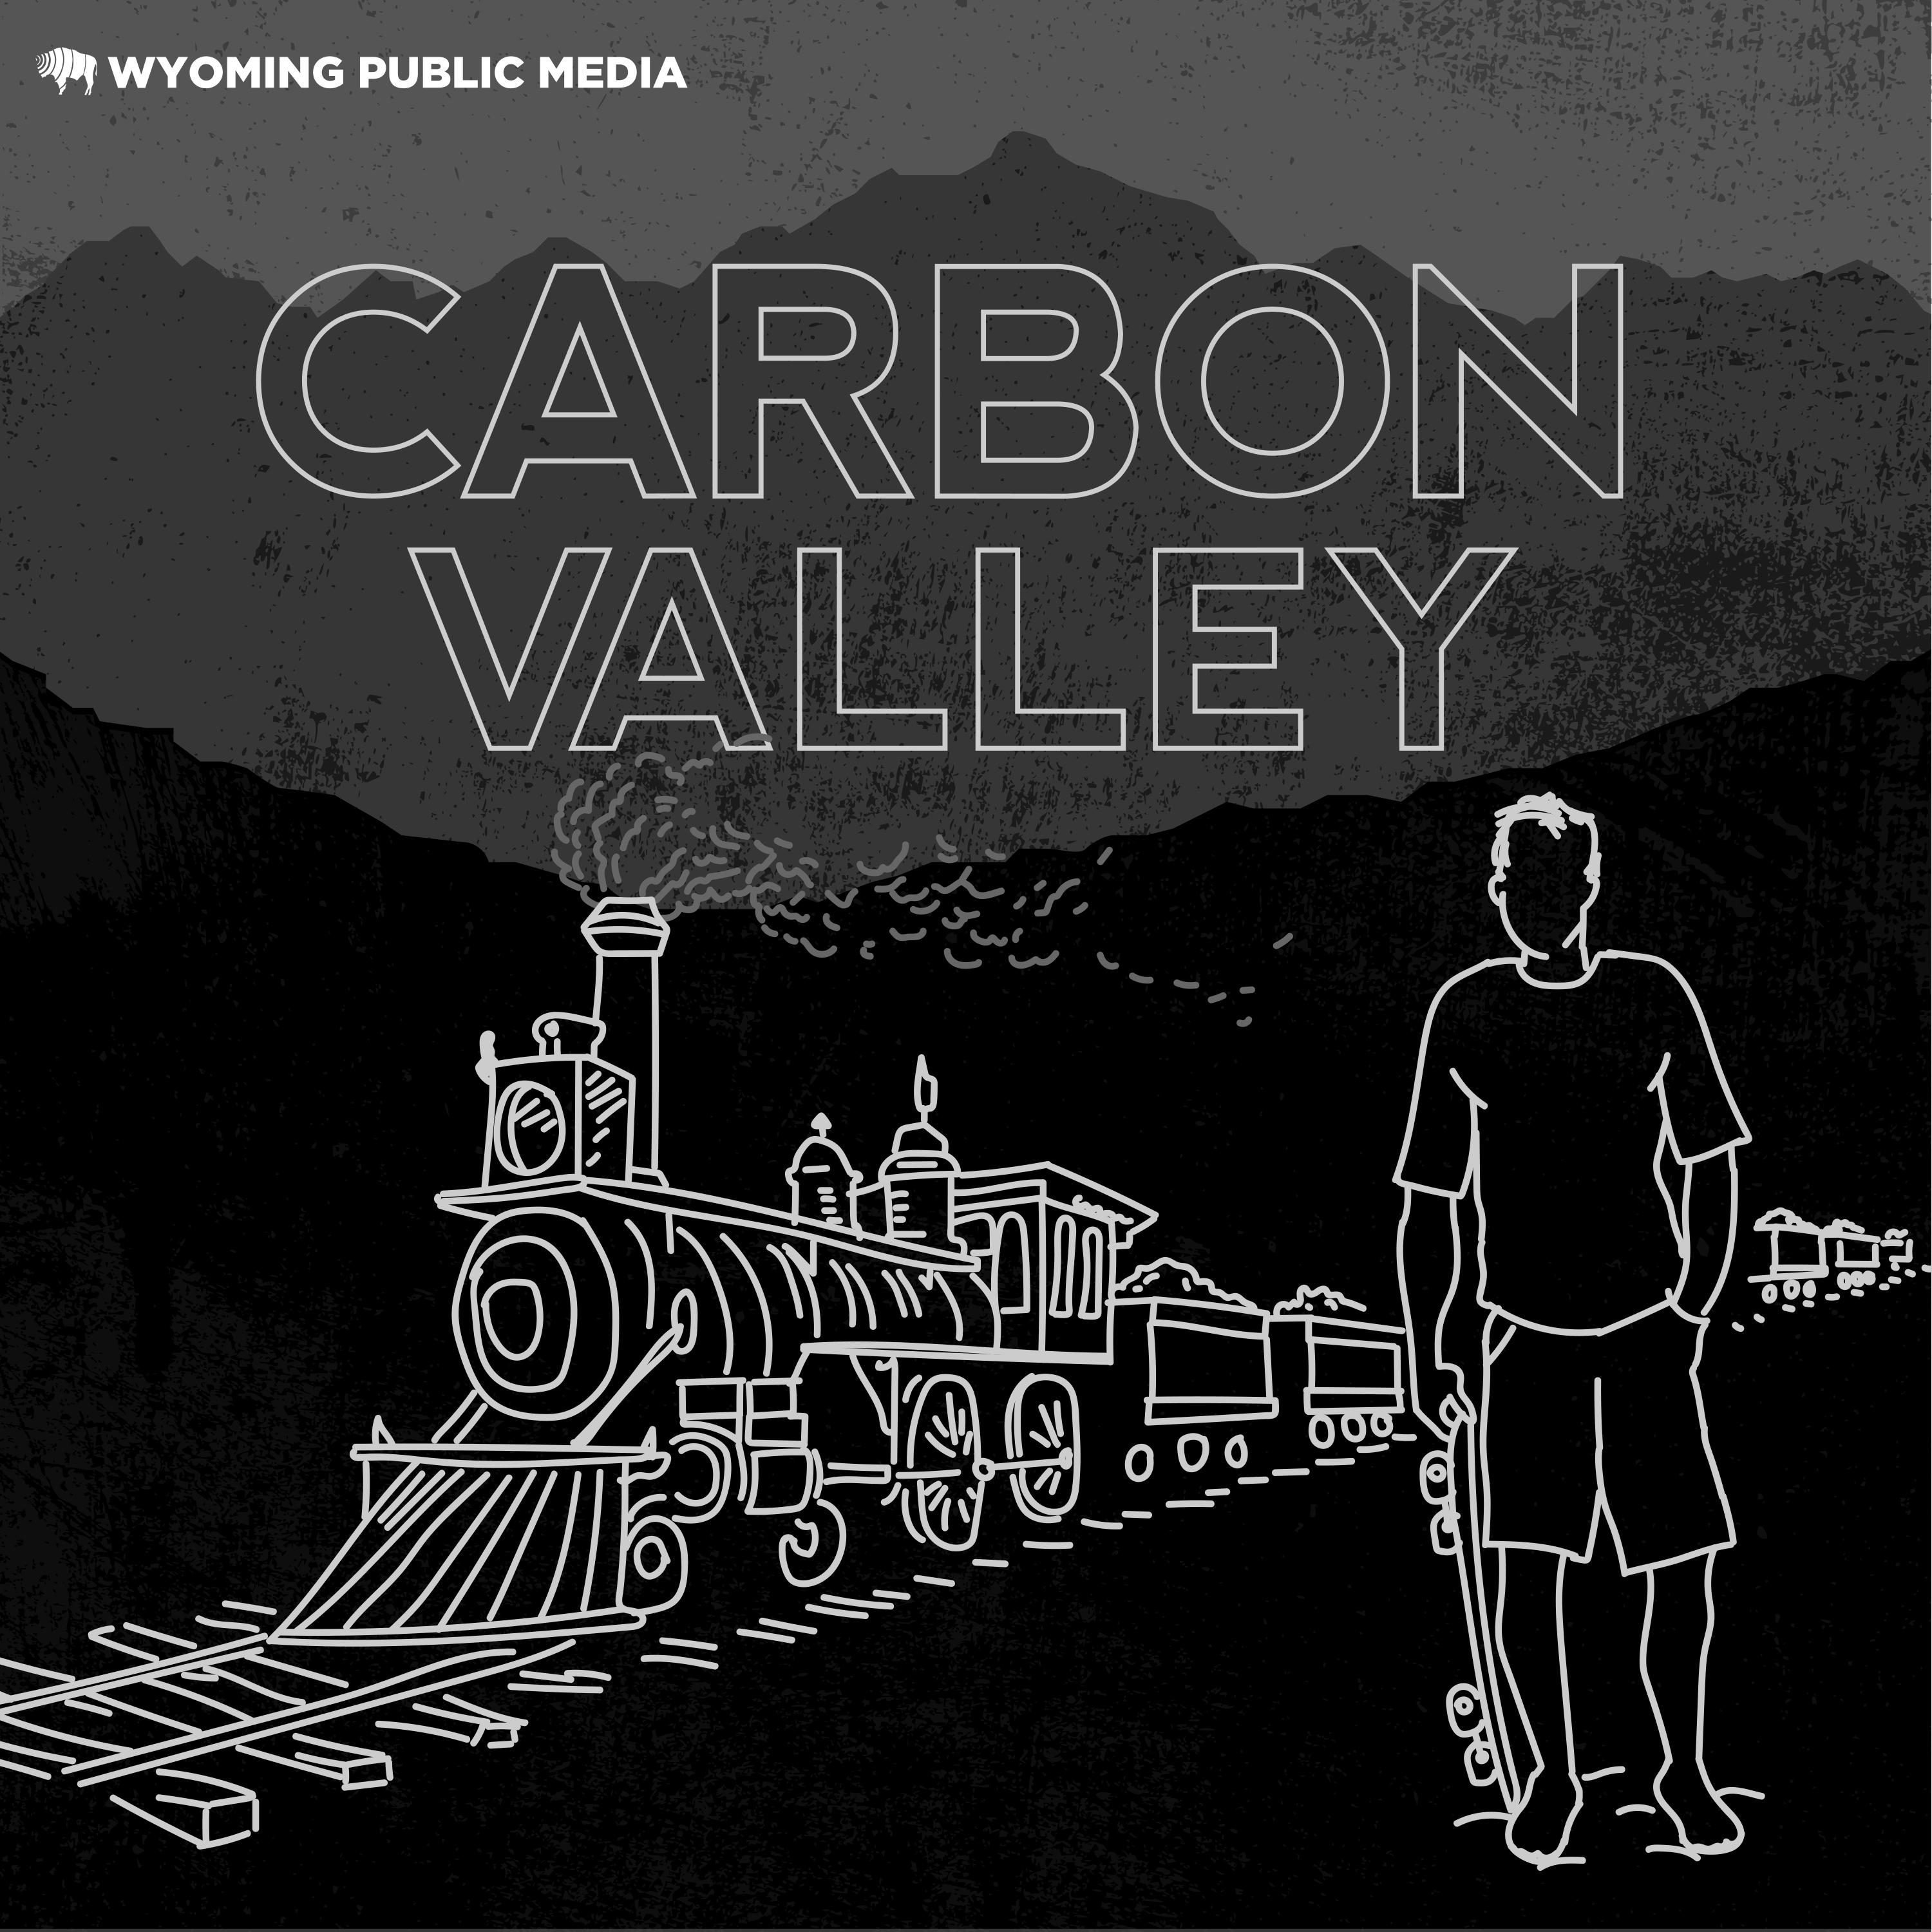 Thumbnail for "Carbon Valley Trailer".